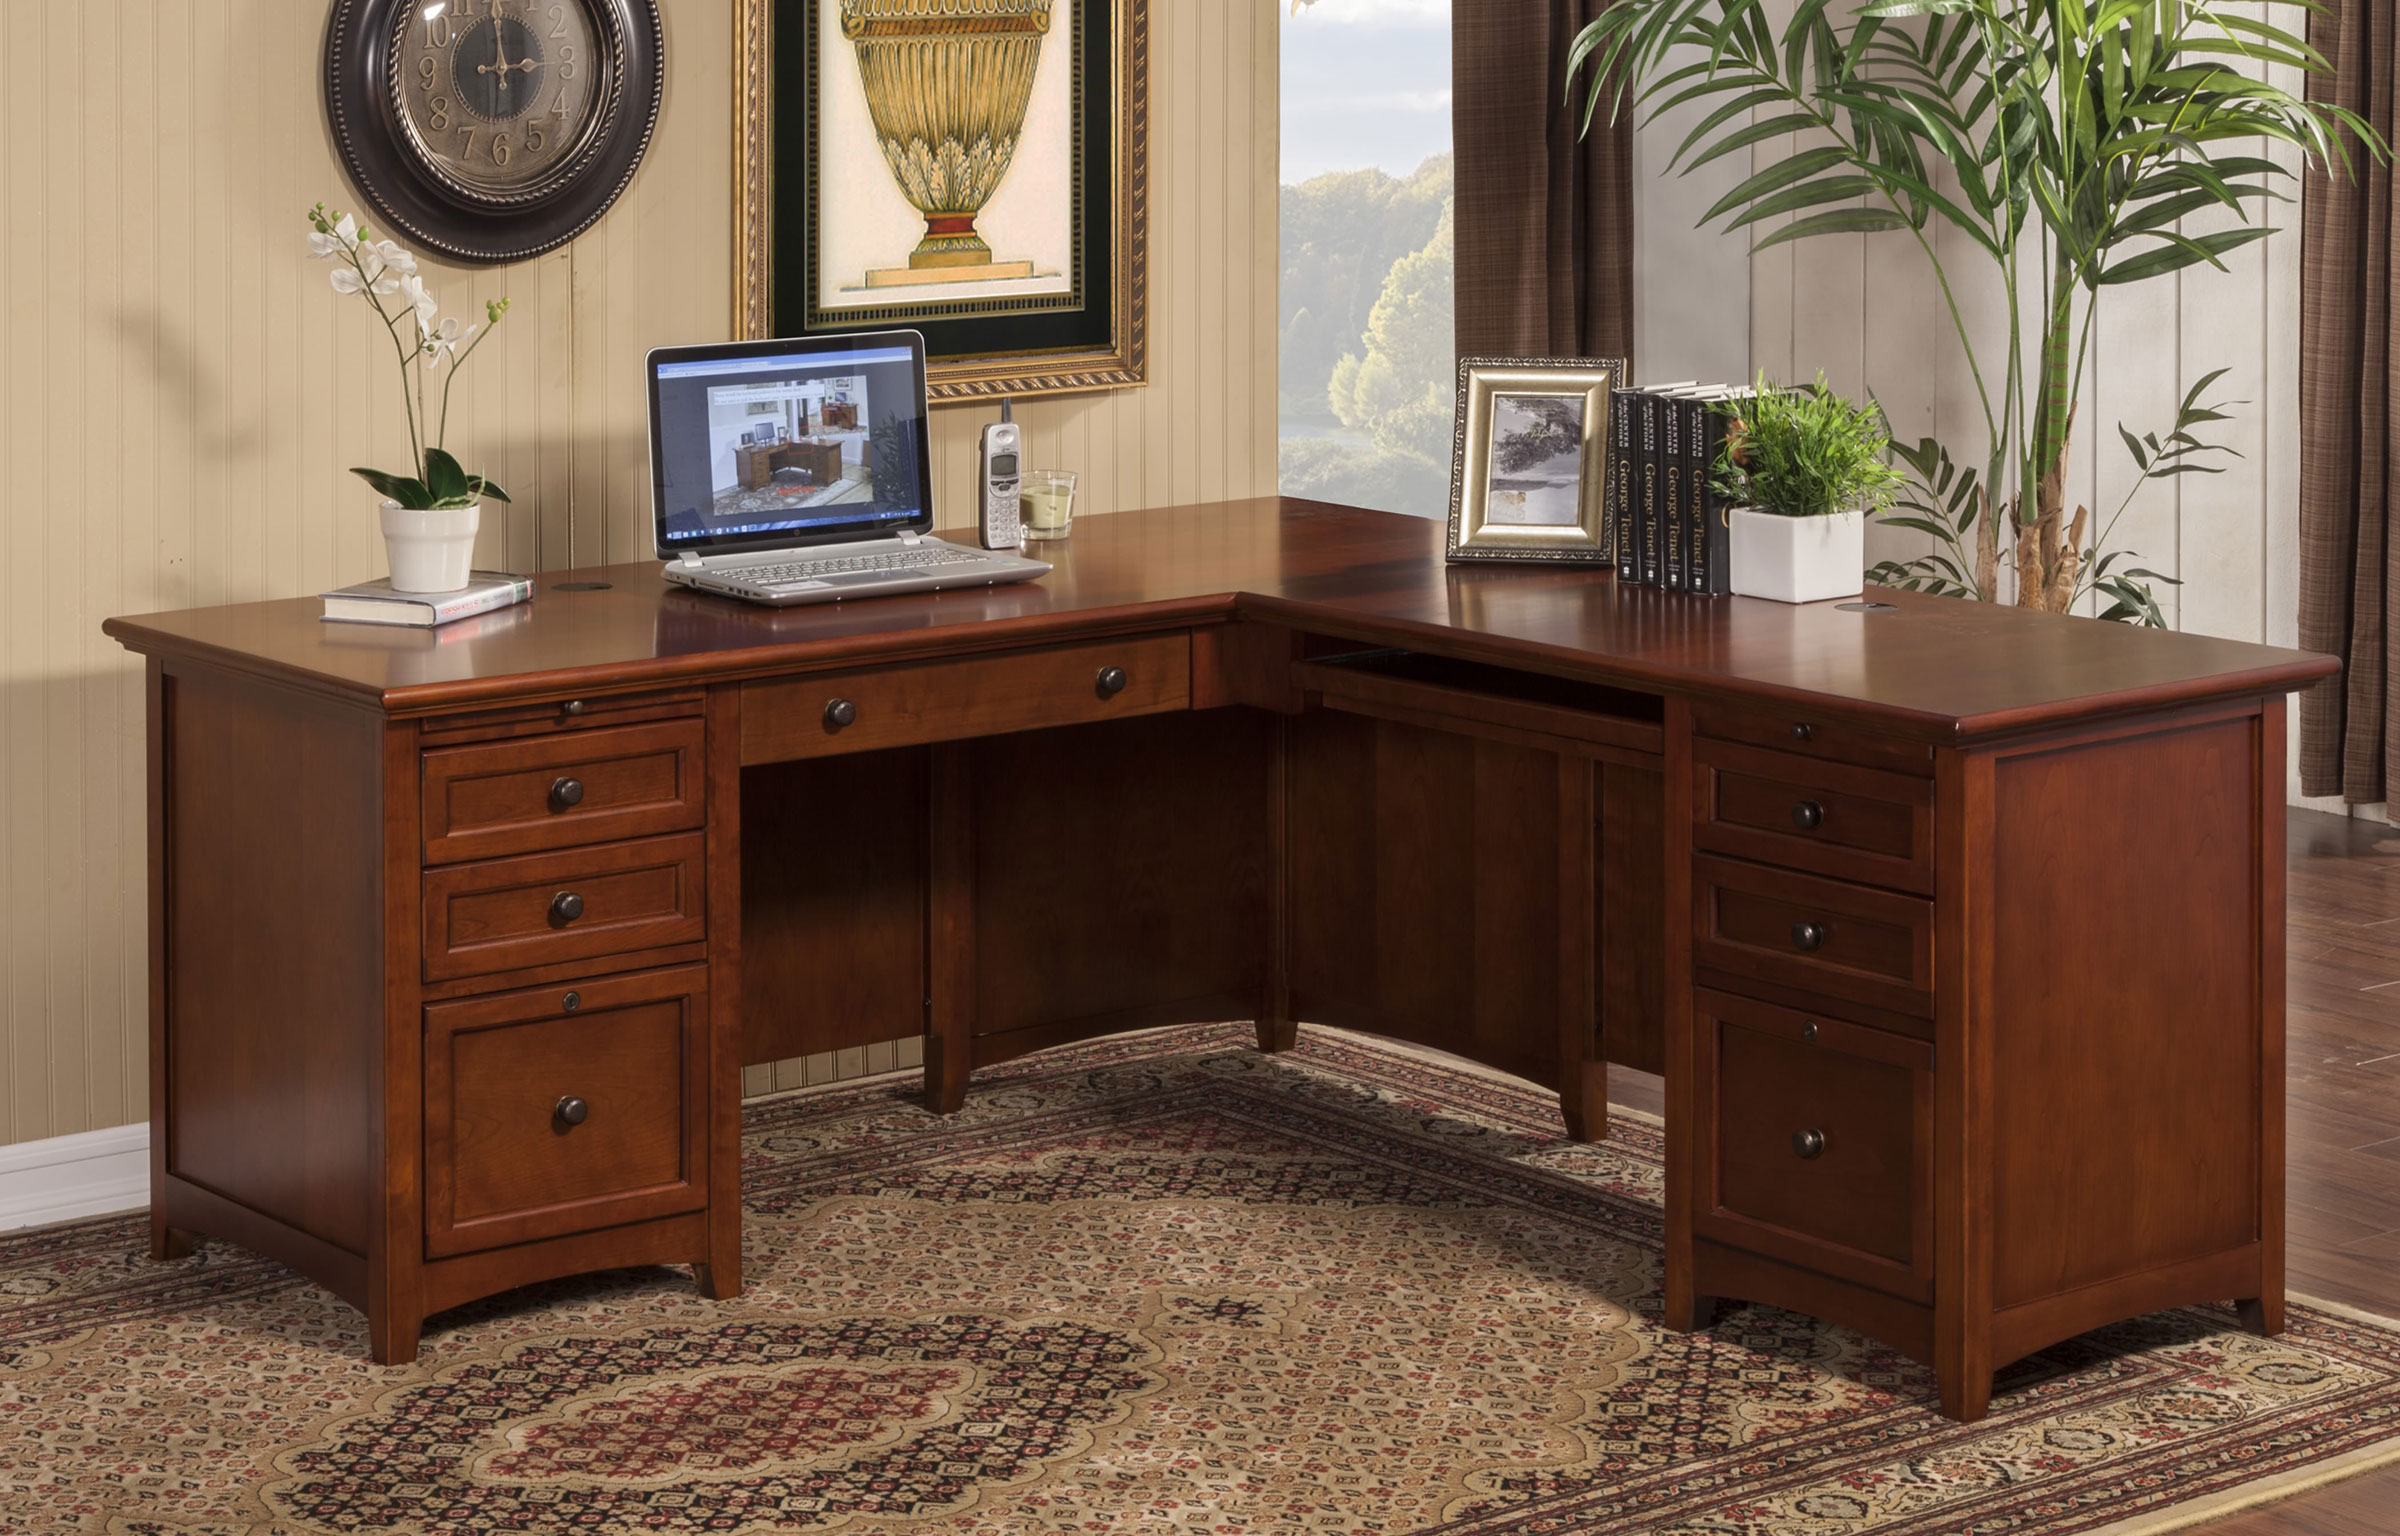 L Shaped Office Desk With Drawers